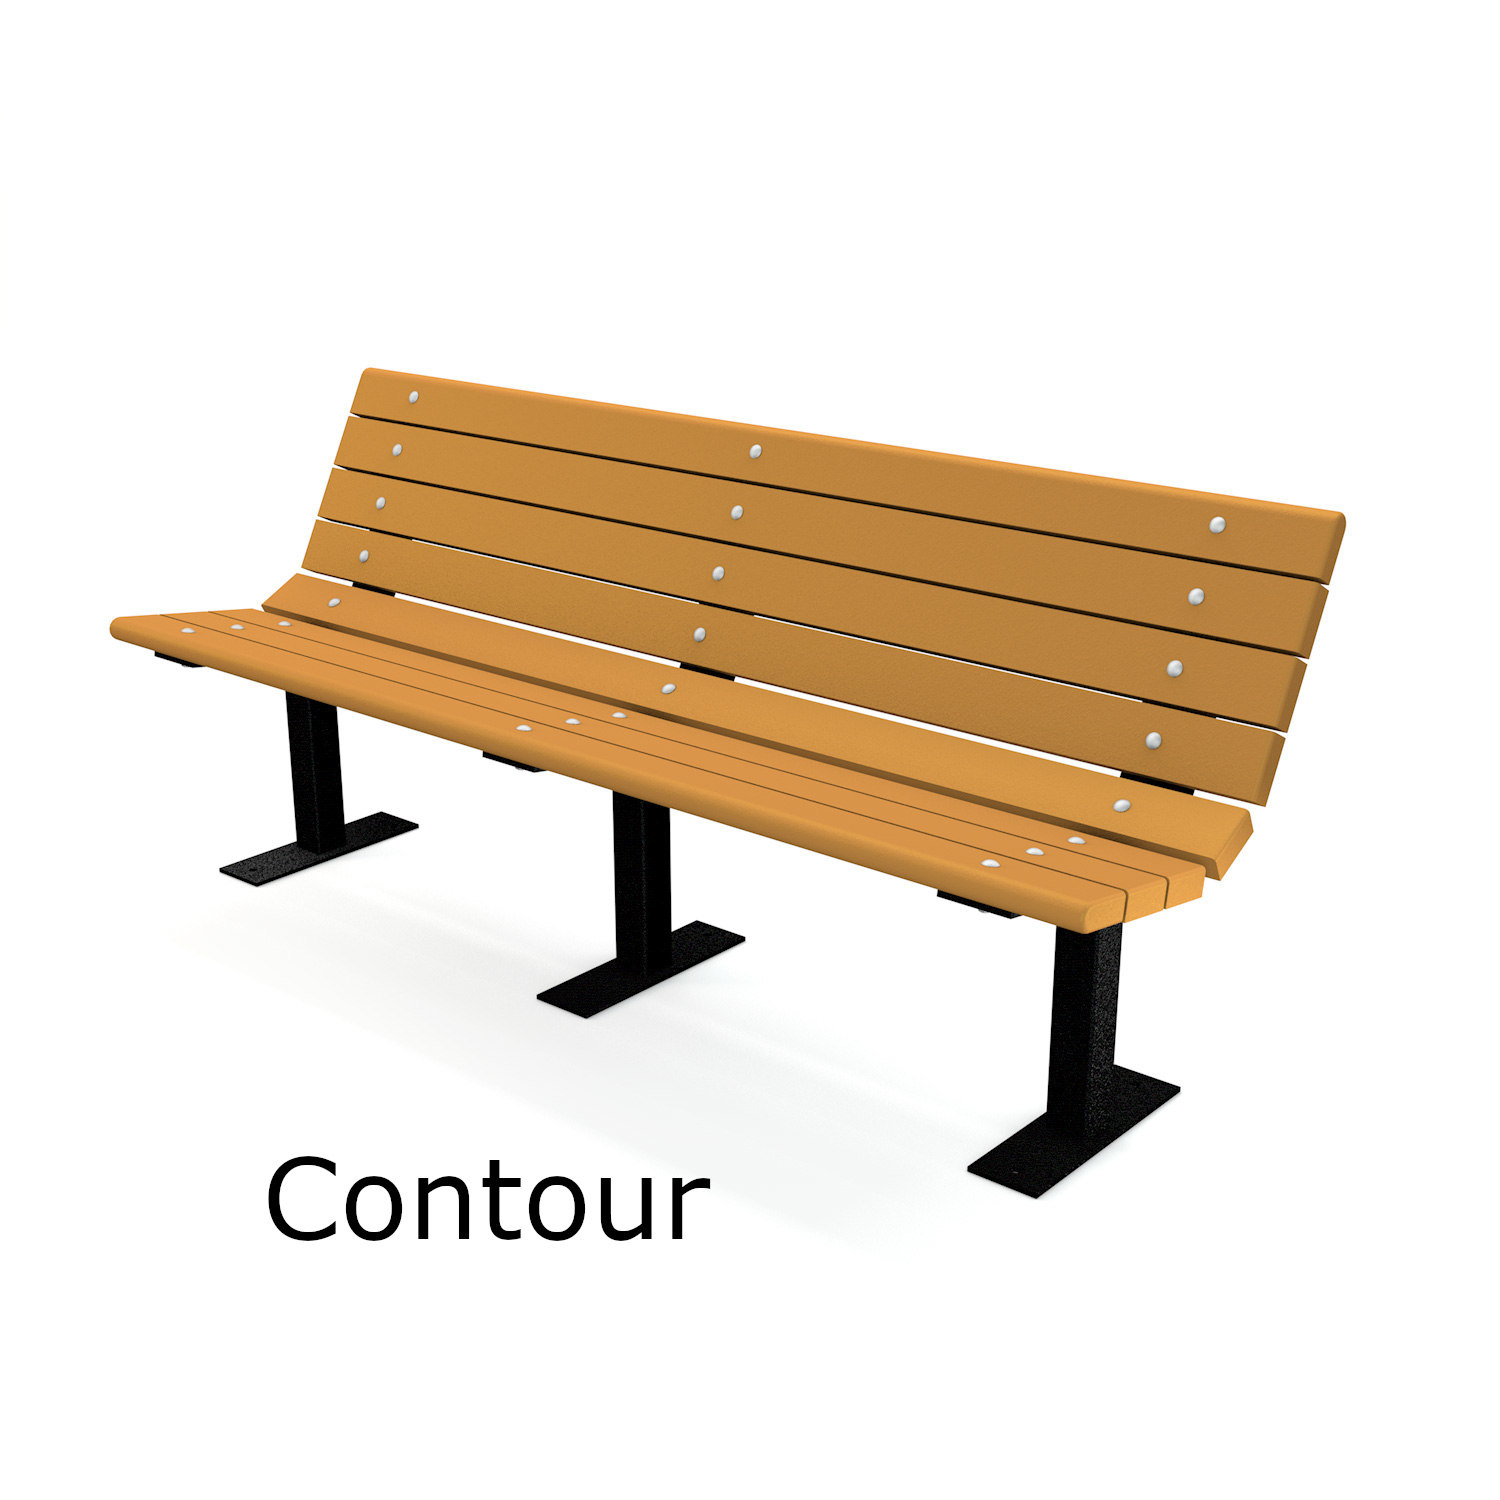 Contour Recycled Plastic Lumber Park Bench